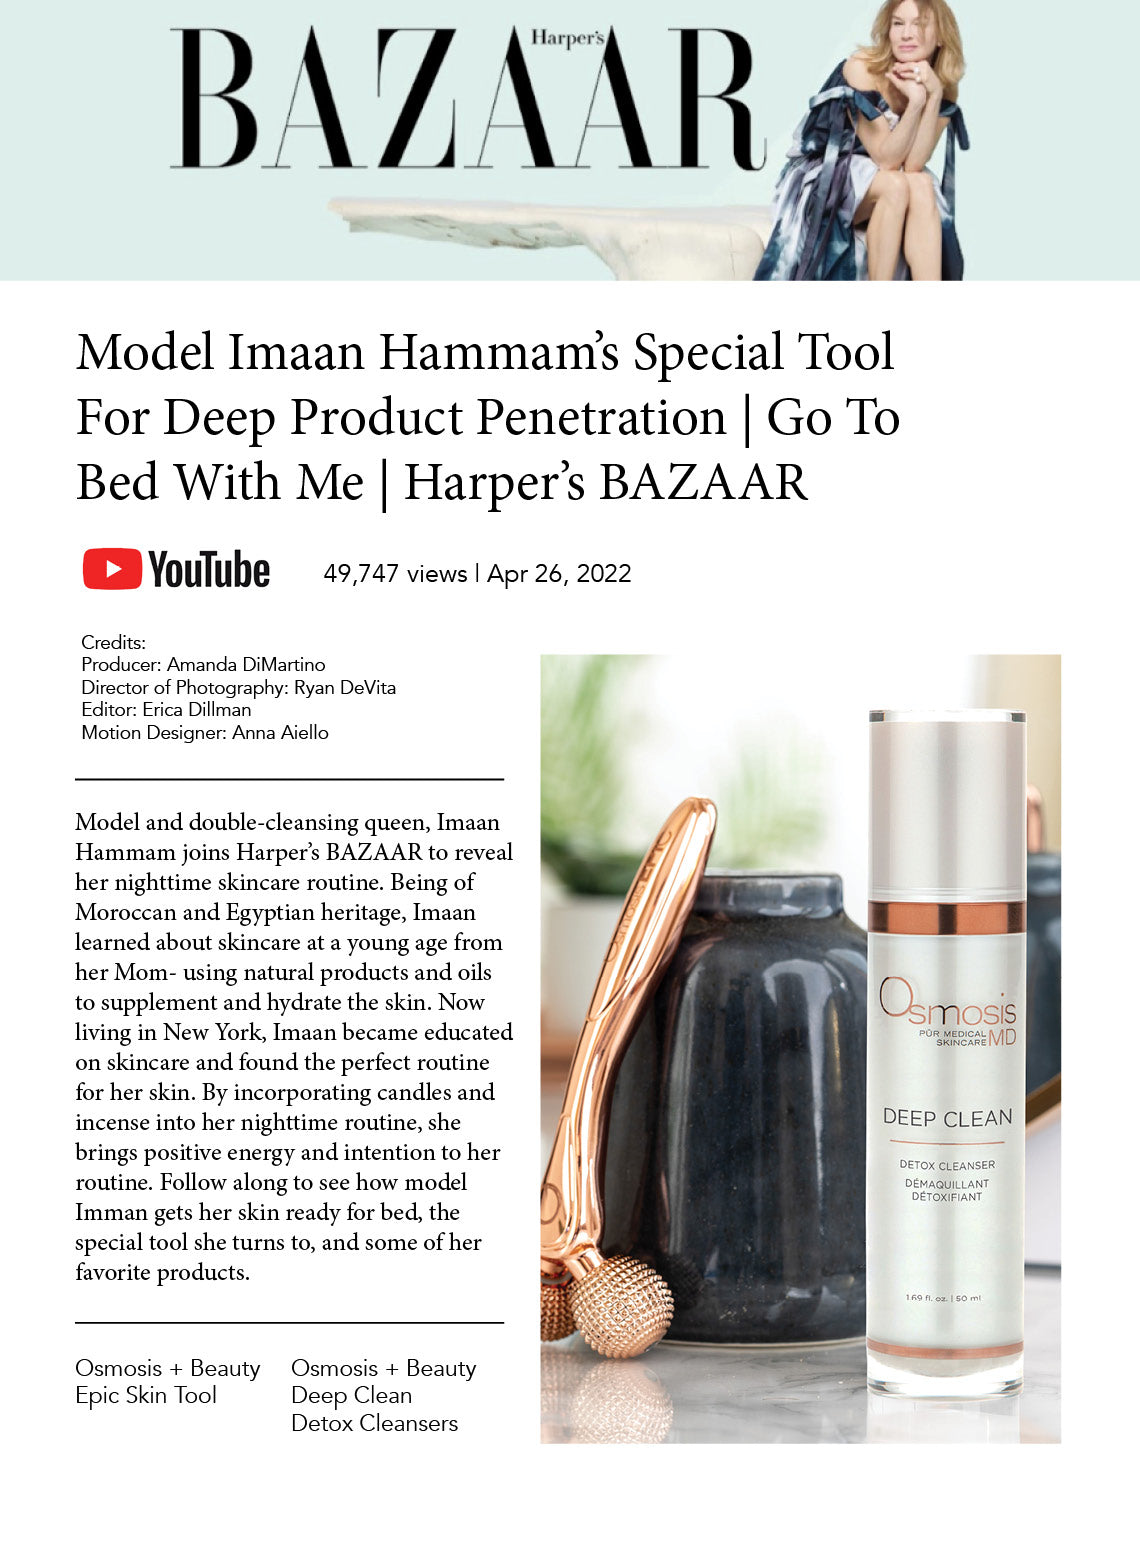 Model Imaan Hammam featured the Deep Clean Detox Cleanser and EPIC Skin Tool in a video interview on Harper’s Bazaar